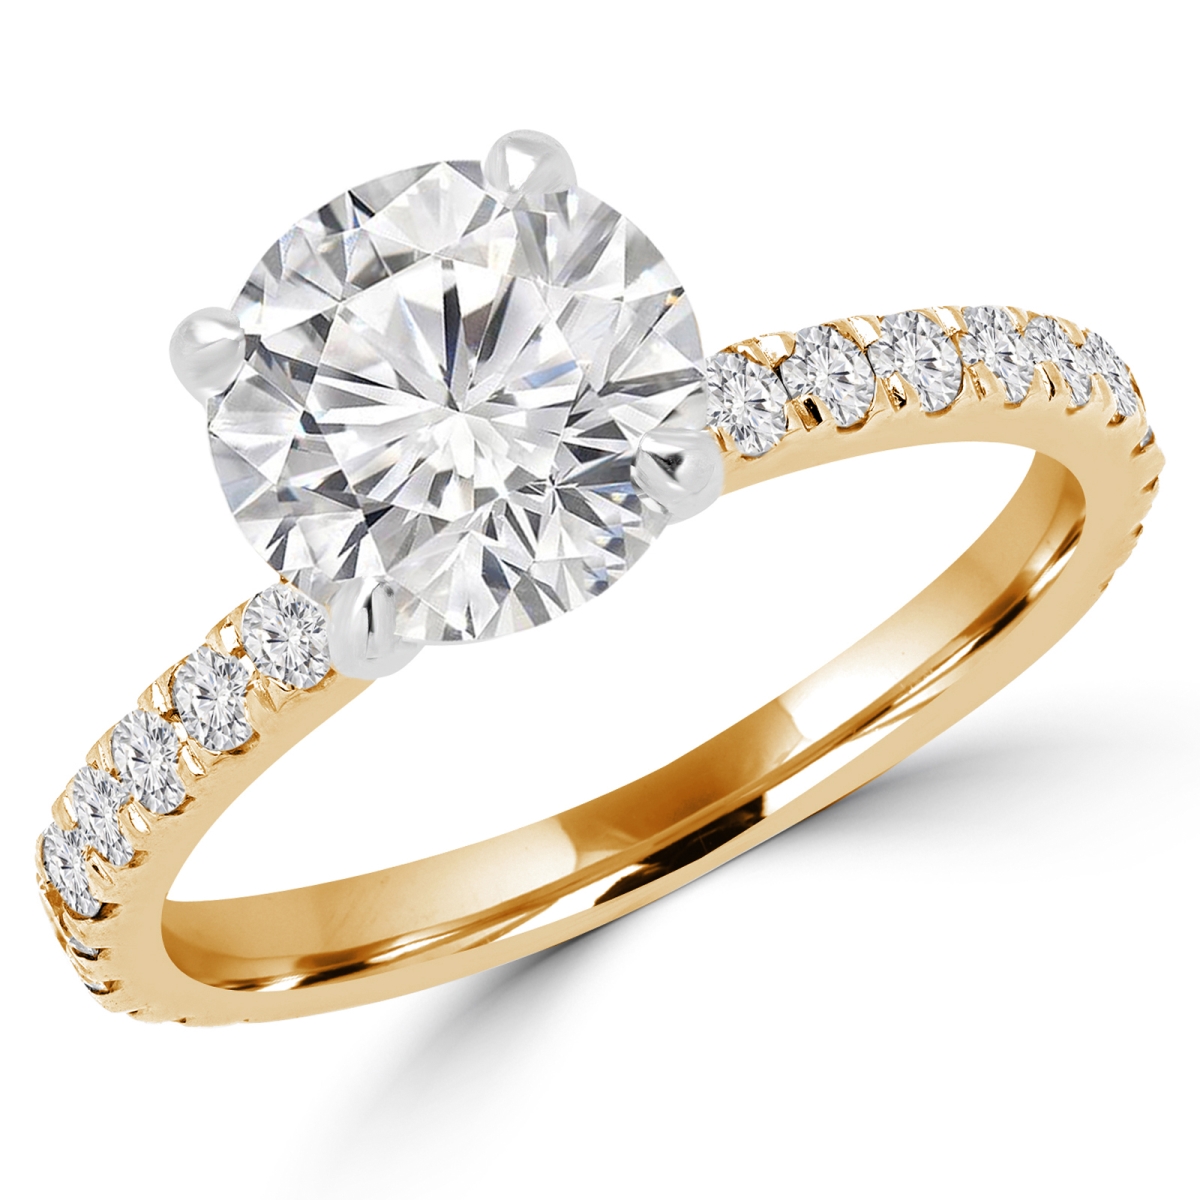 Picture of Majesty Diamonds MD160340-6 1 CTW Round Cut Diamond Multi Stone Engagement Ring in 14K Yellow Gold - Size 6